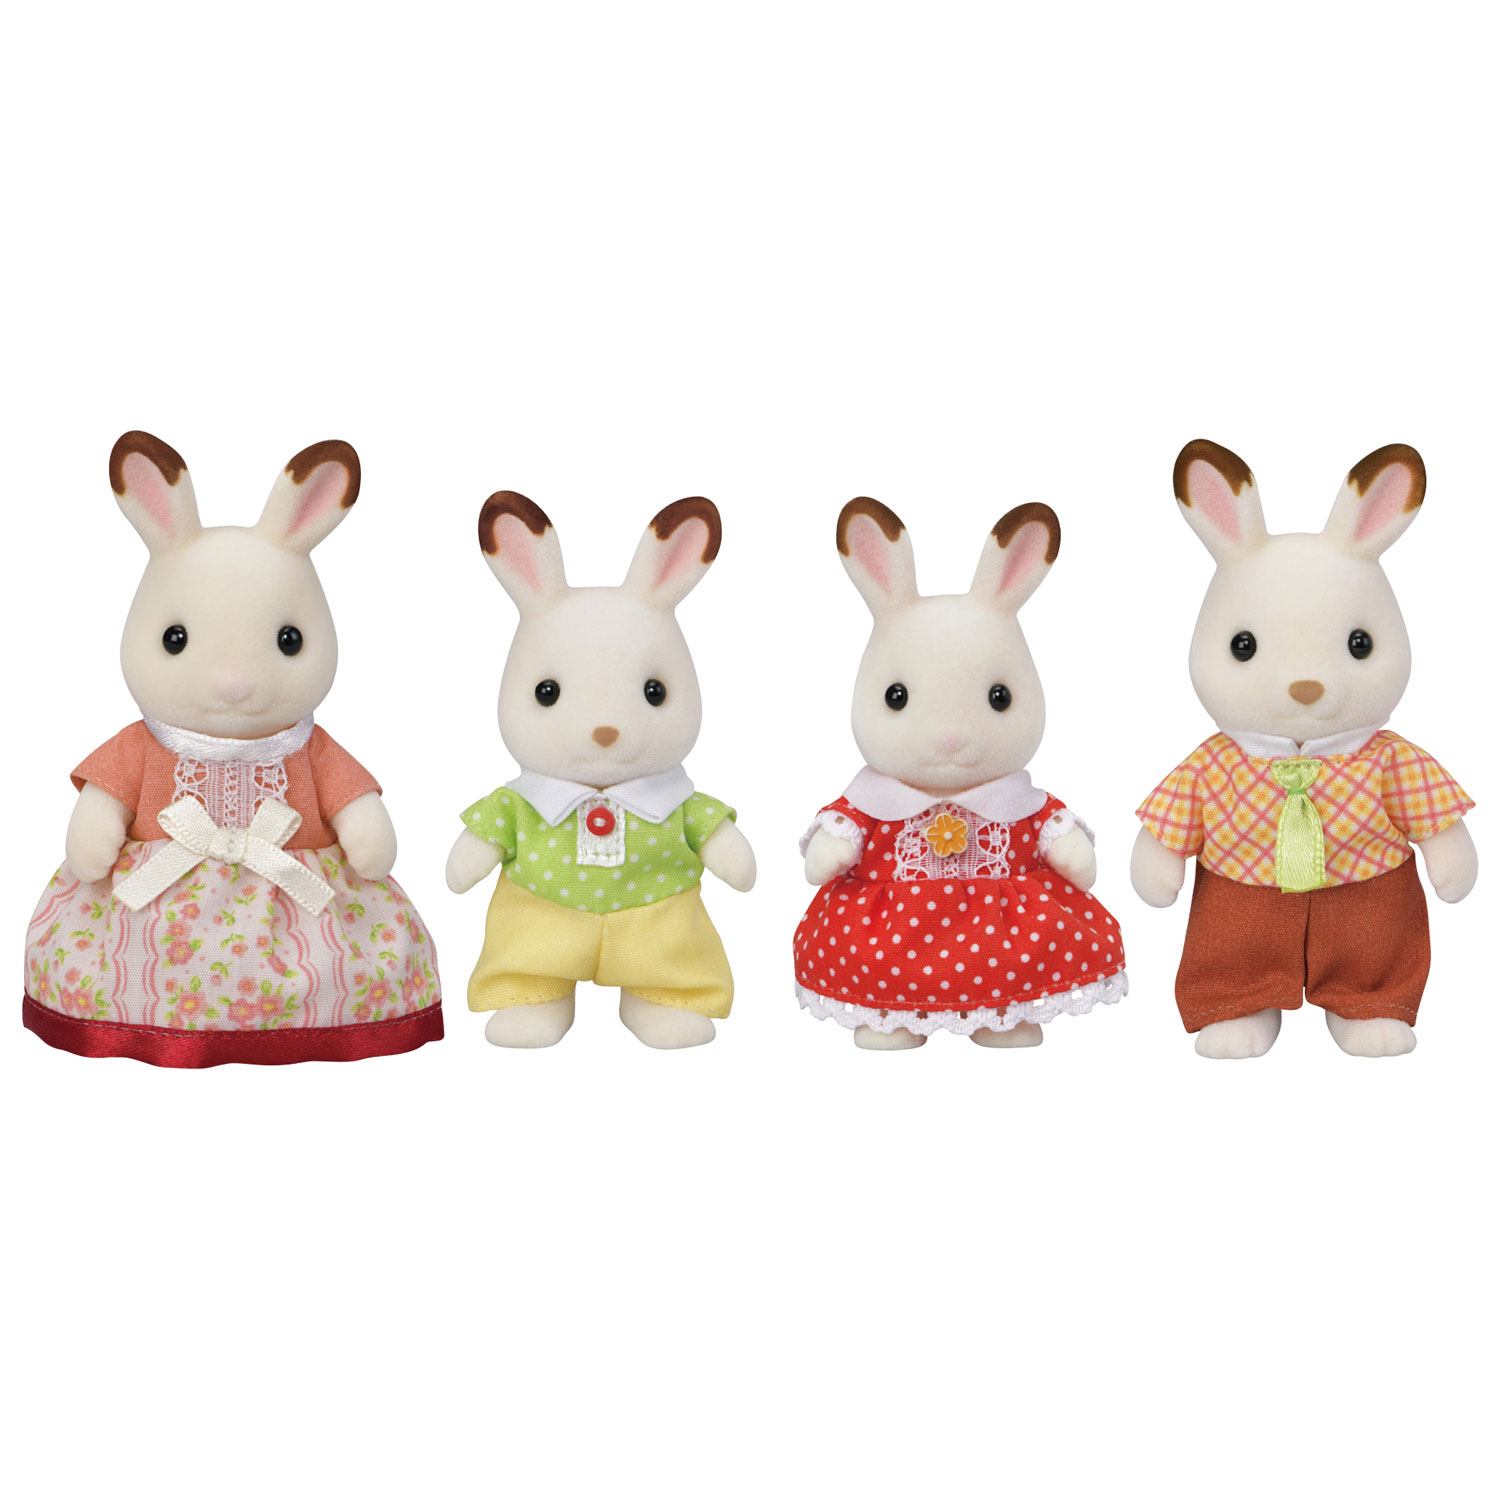 Calico Critters Chocolate Rabbit Family Playset